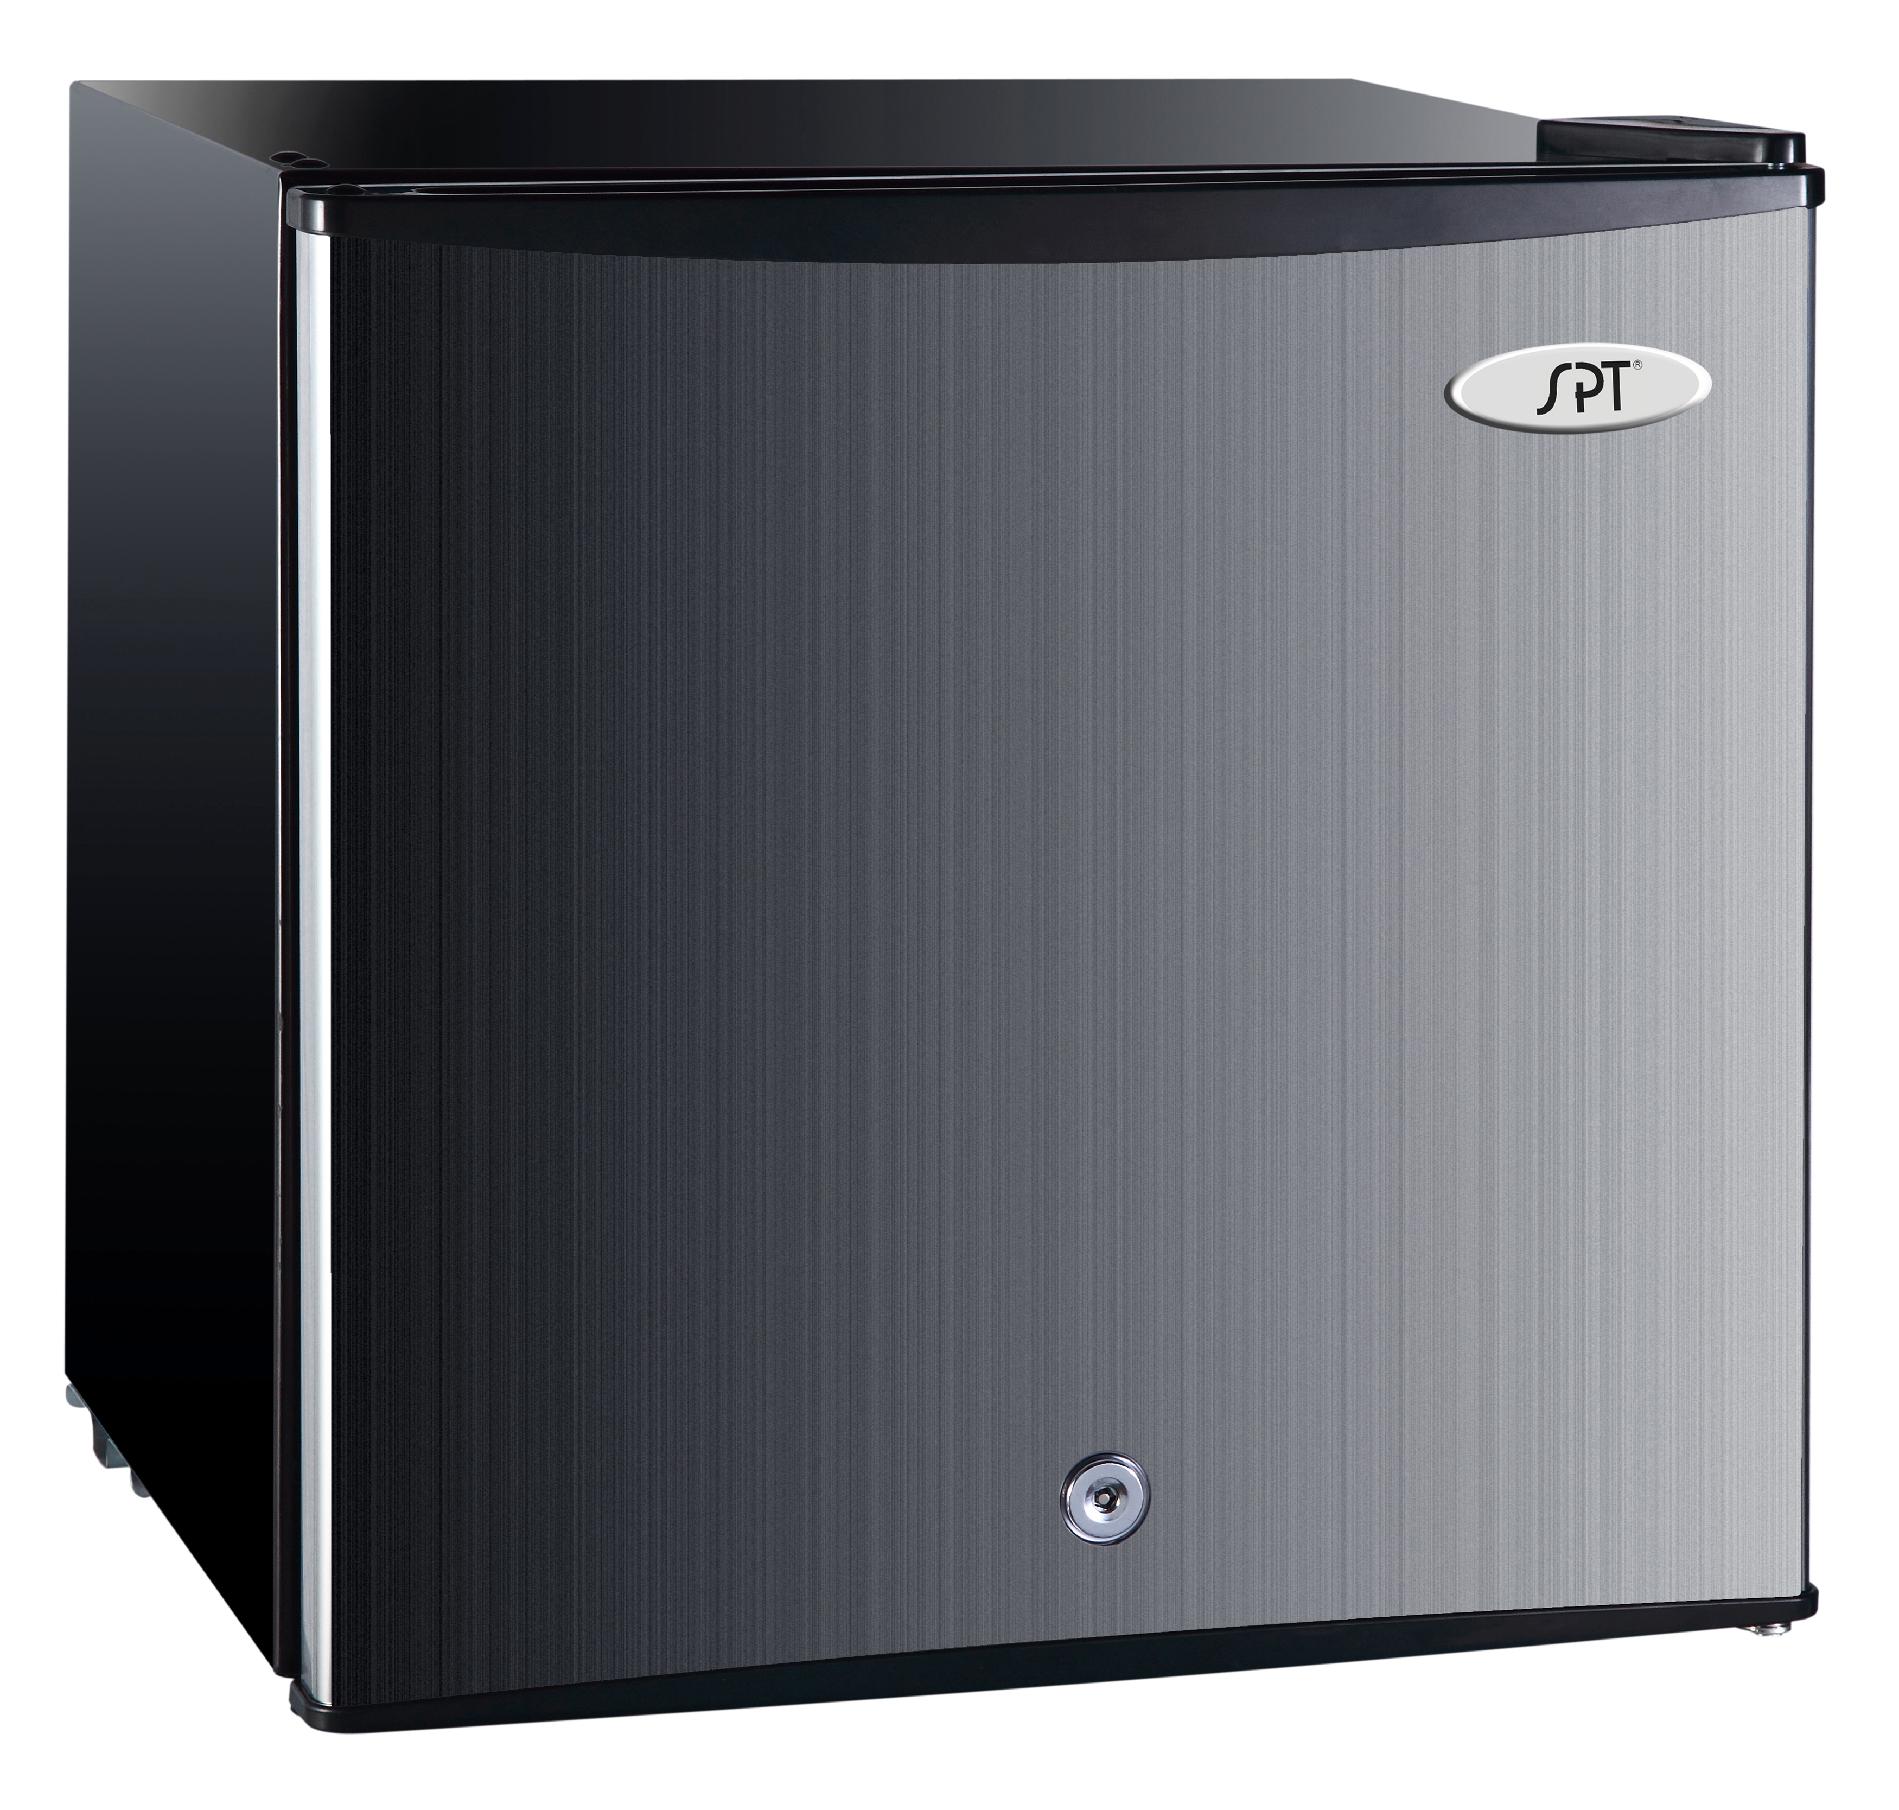 SPT 1.1 cu.ft. Upright Freezer in Stainless Steel 